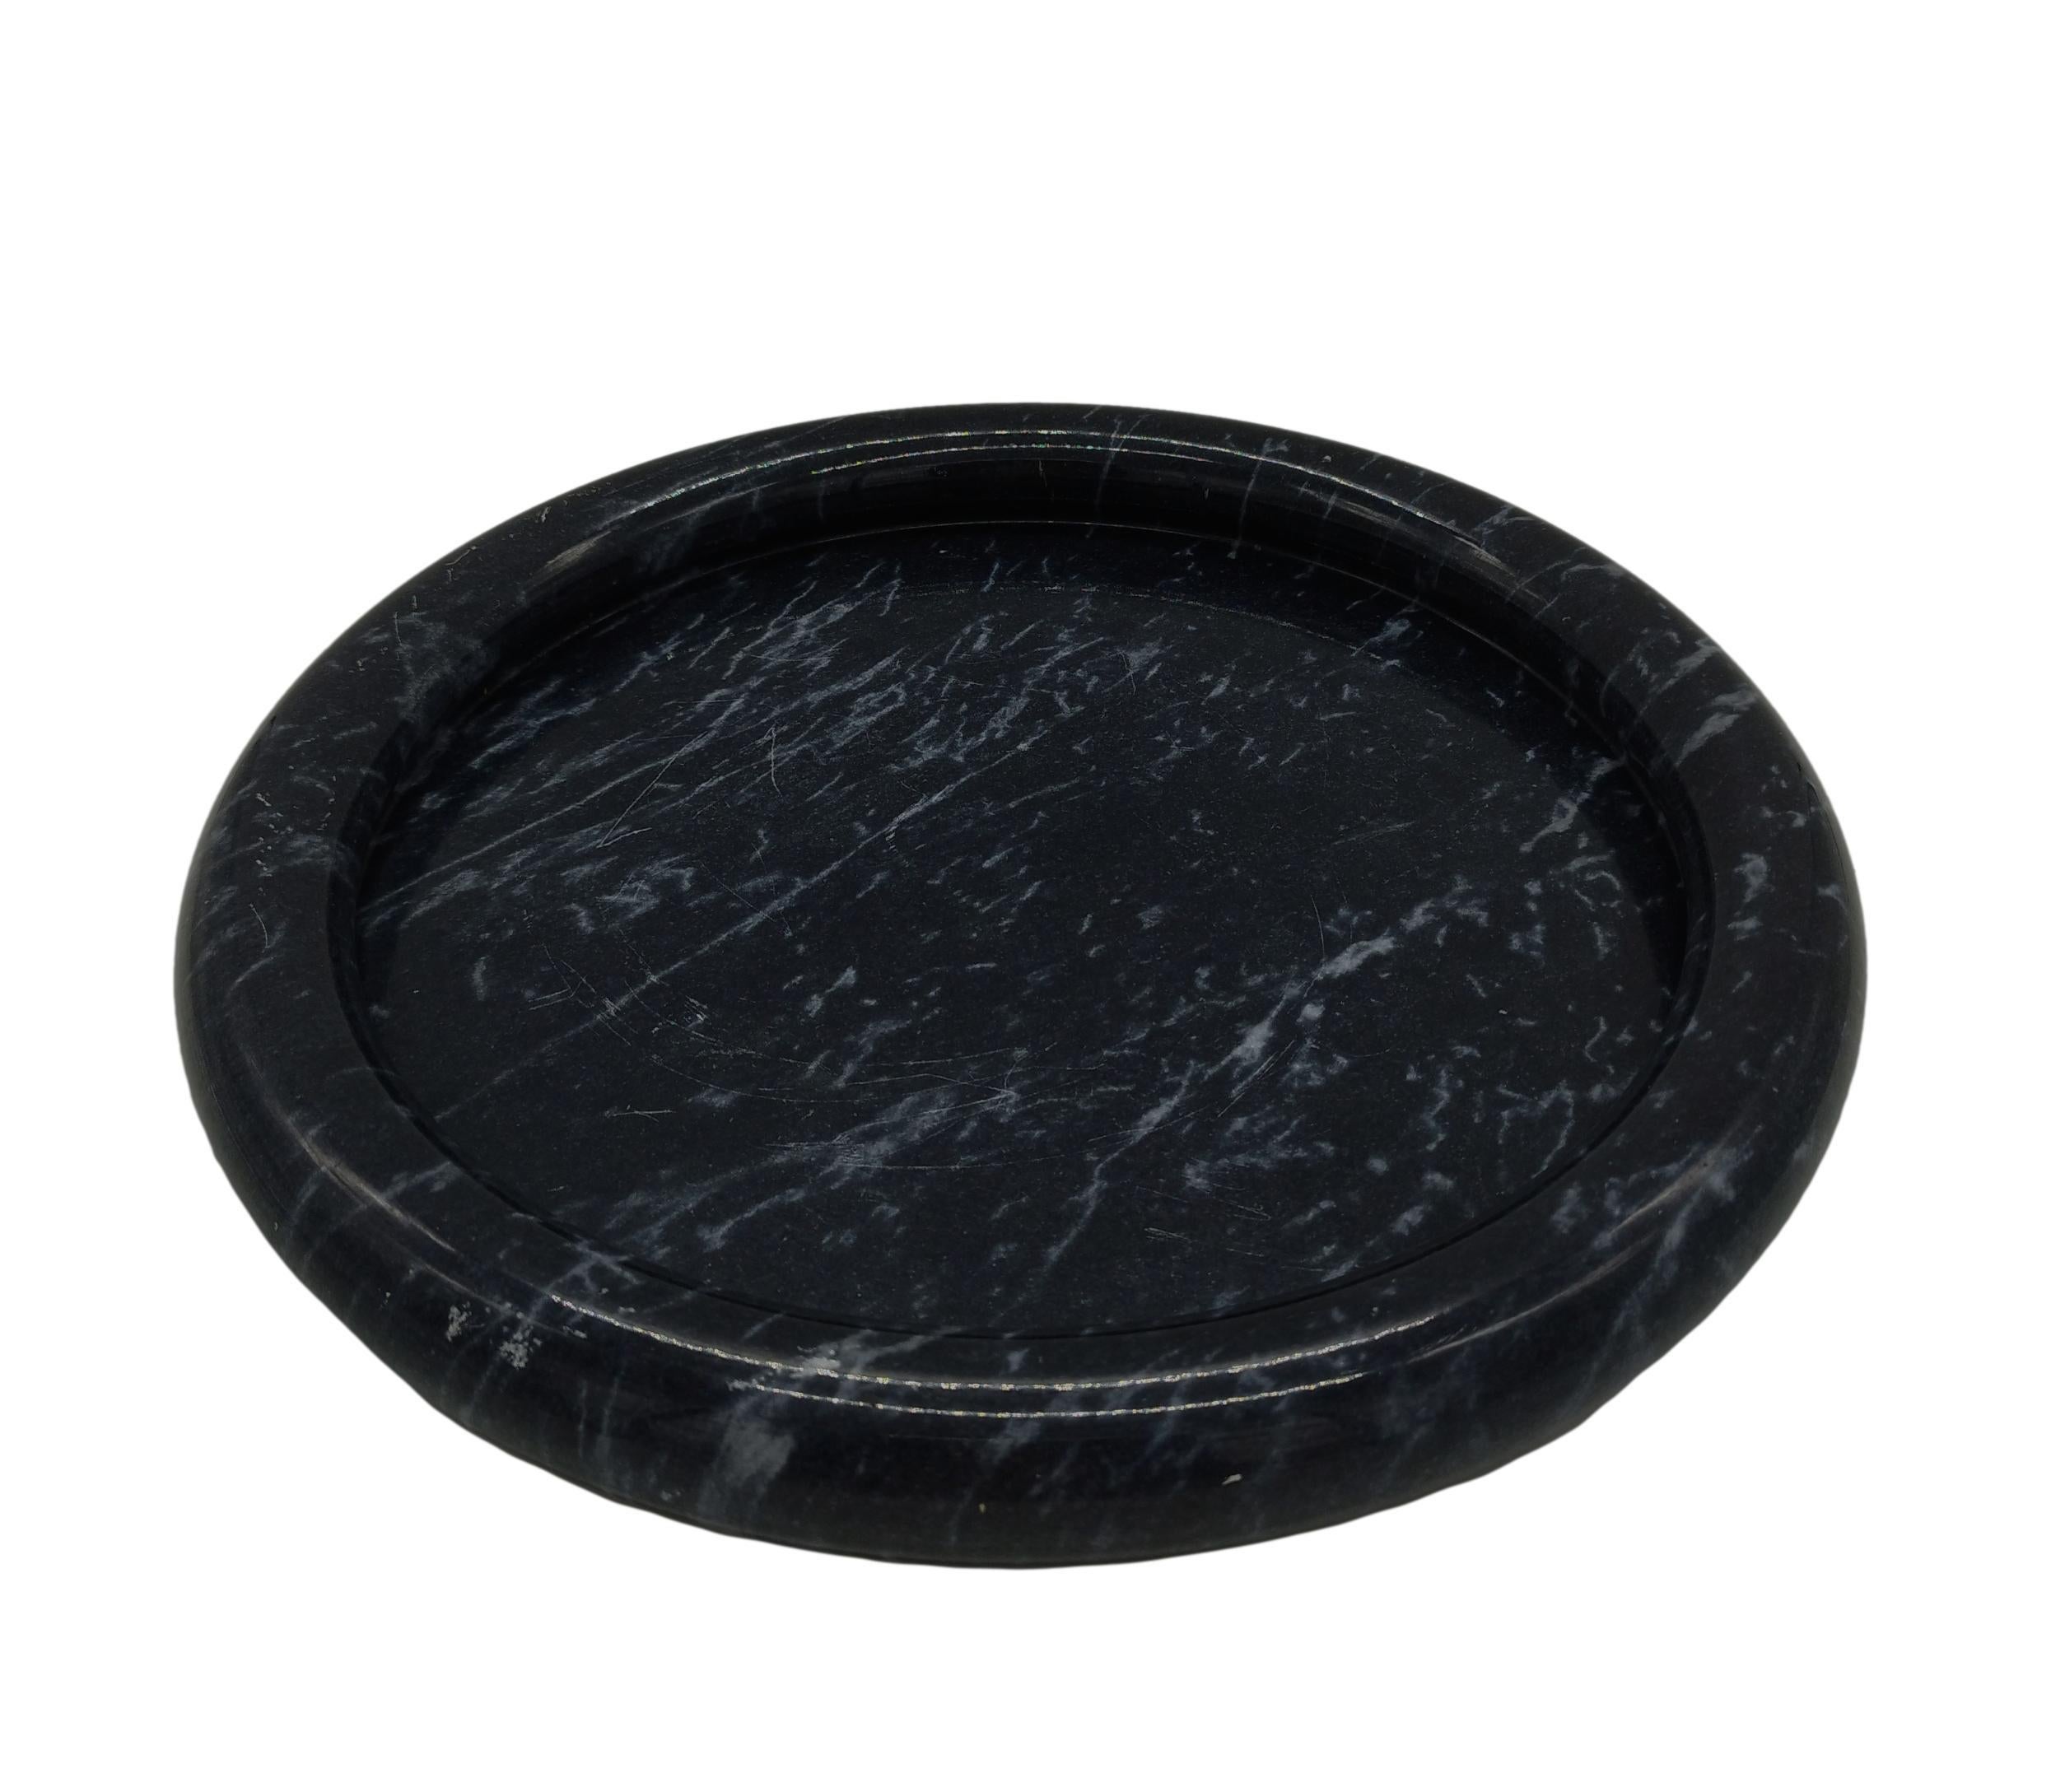 Marquinia black marble centrepiece/tray designed by Sergio Asti and manufactured by Up and Up, Italy, 1970s. Excellent condition consistent with age and use.